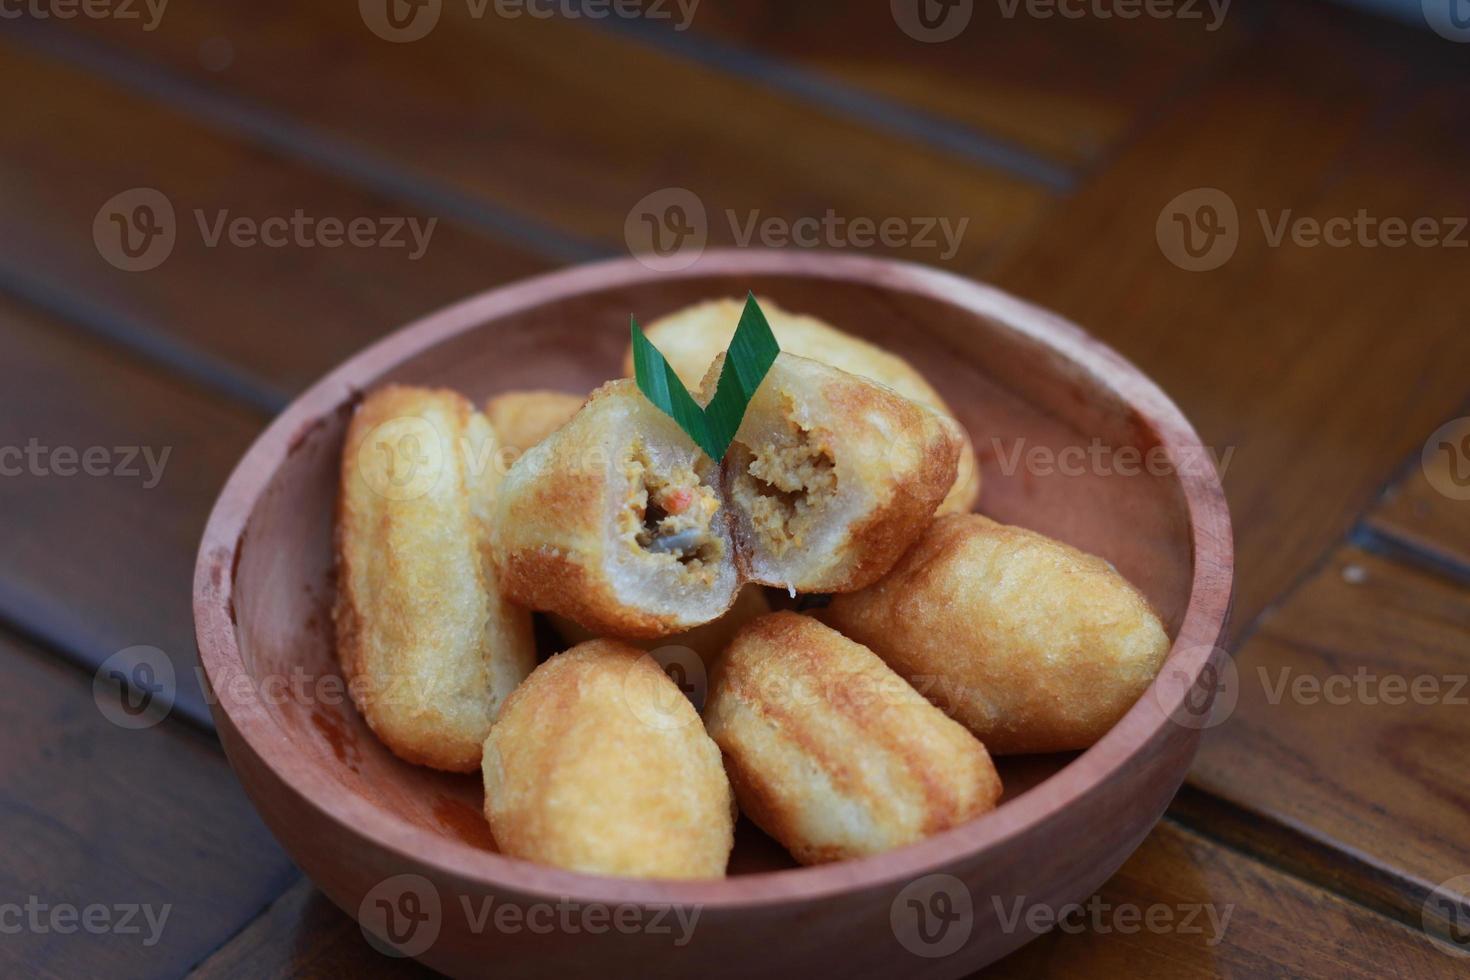 Comro or combro, a traditional Javanese snack made of deep fried grated cassava filled with a savory mix of oncom or fermented soy bean cake and chili photo